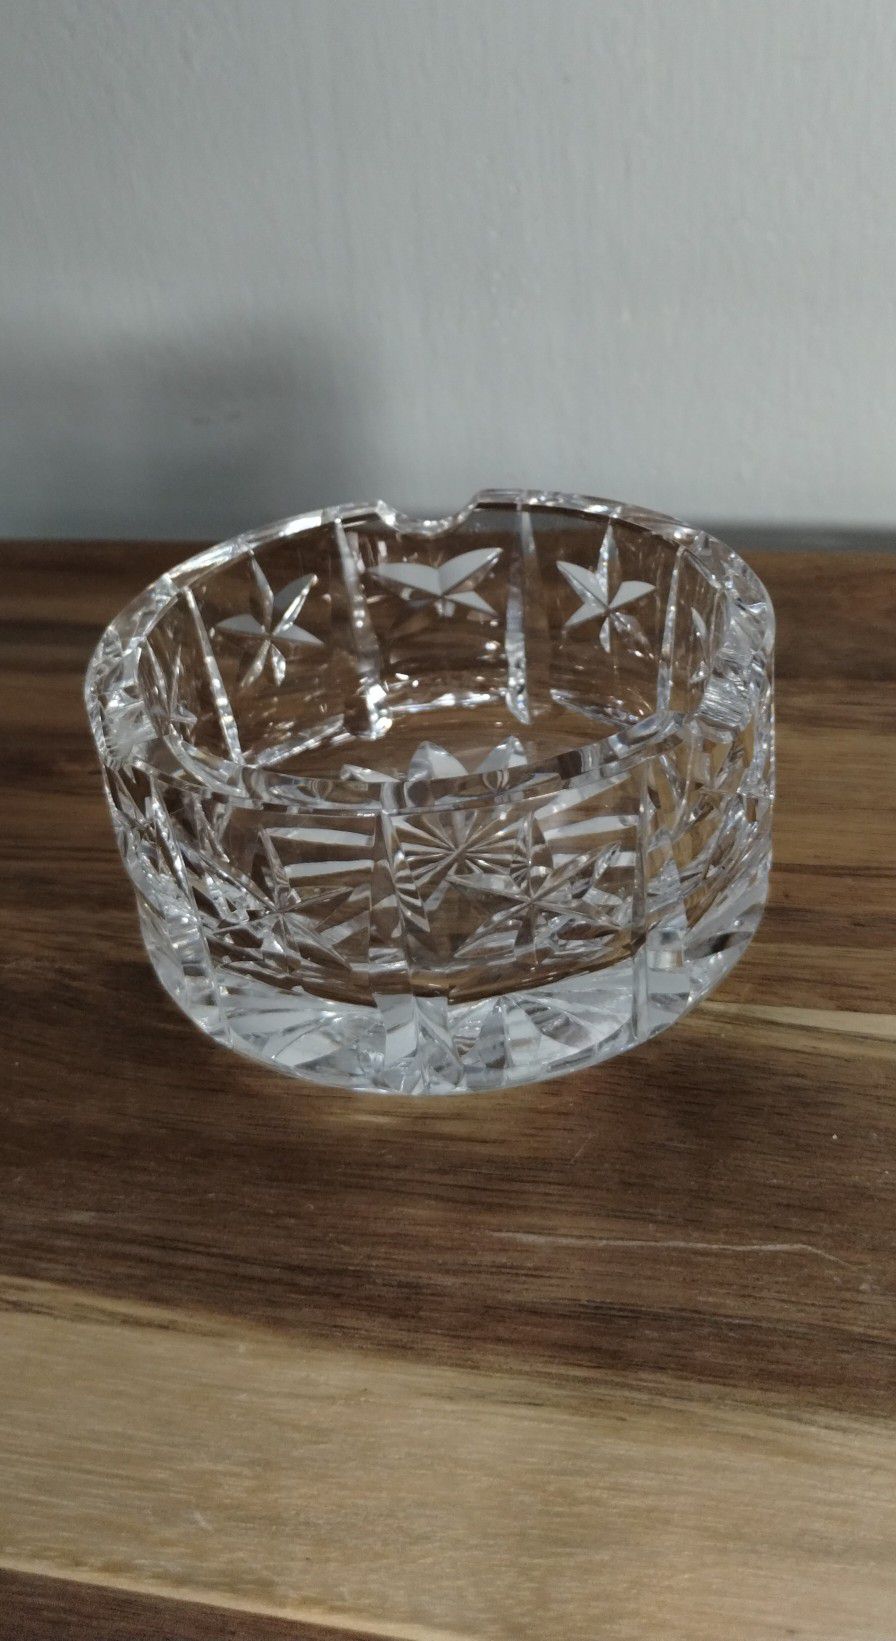 WATERFORD CRYSTAL SMALL ROUND ASHTRAY 3"×2"